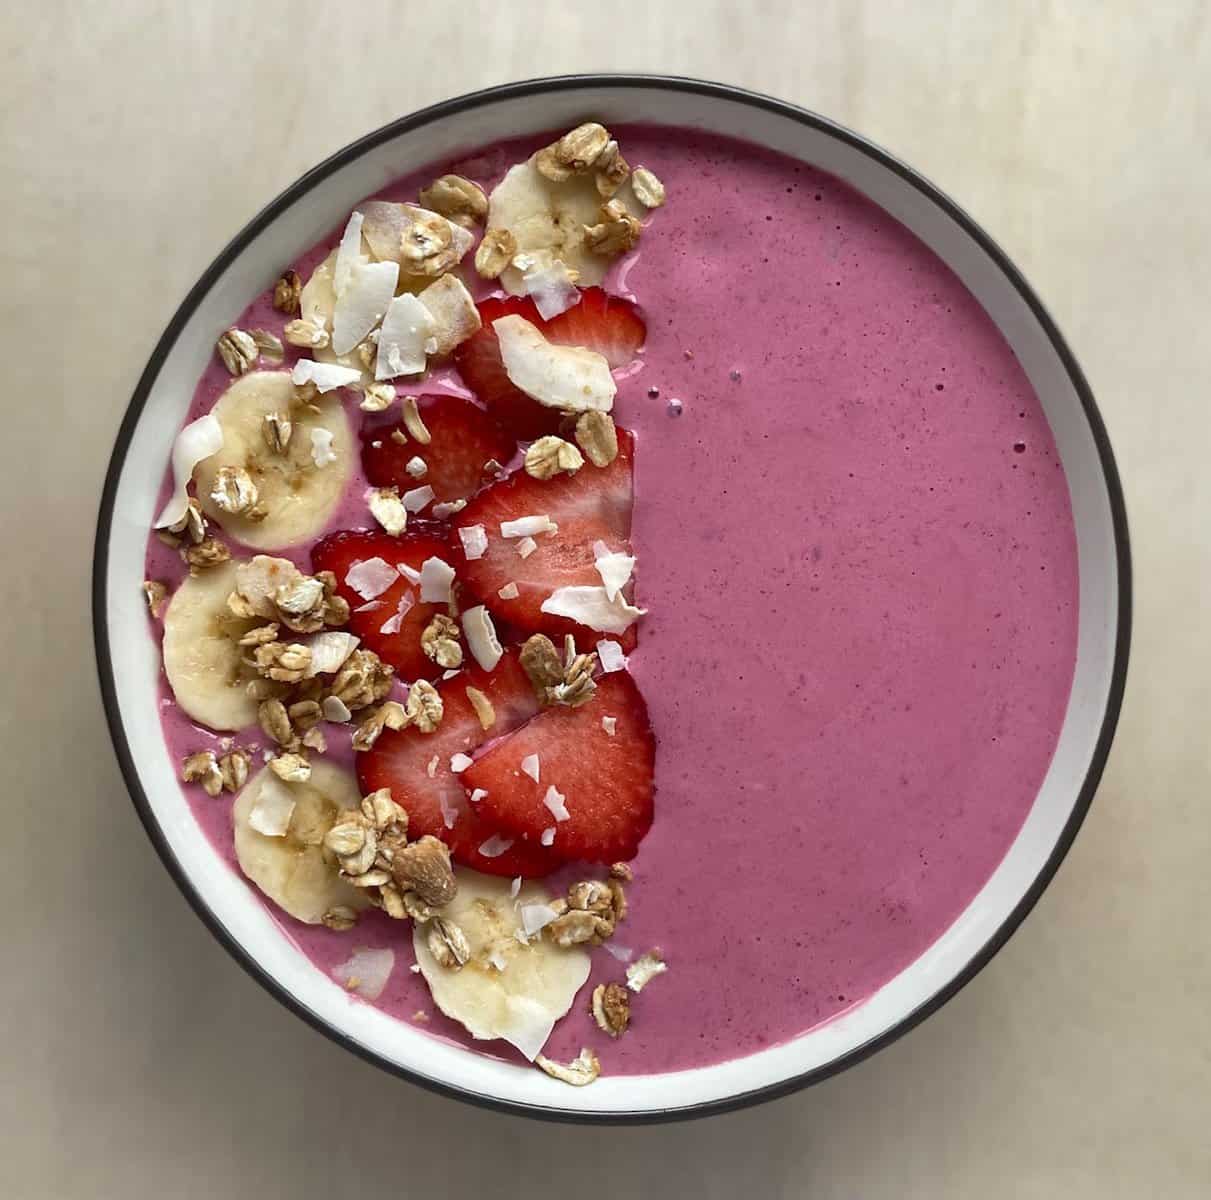 pink smoothie bowl with fruit and homemade gourmet granola over the left half.